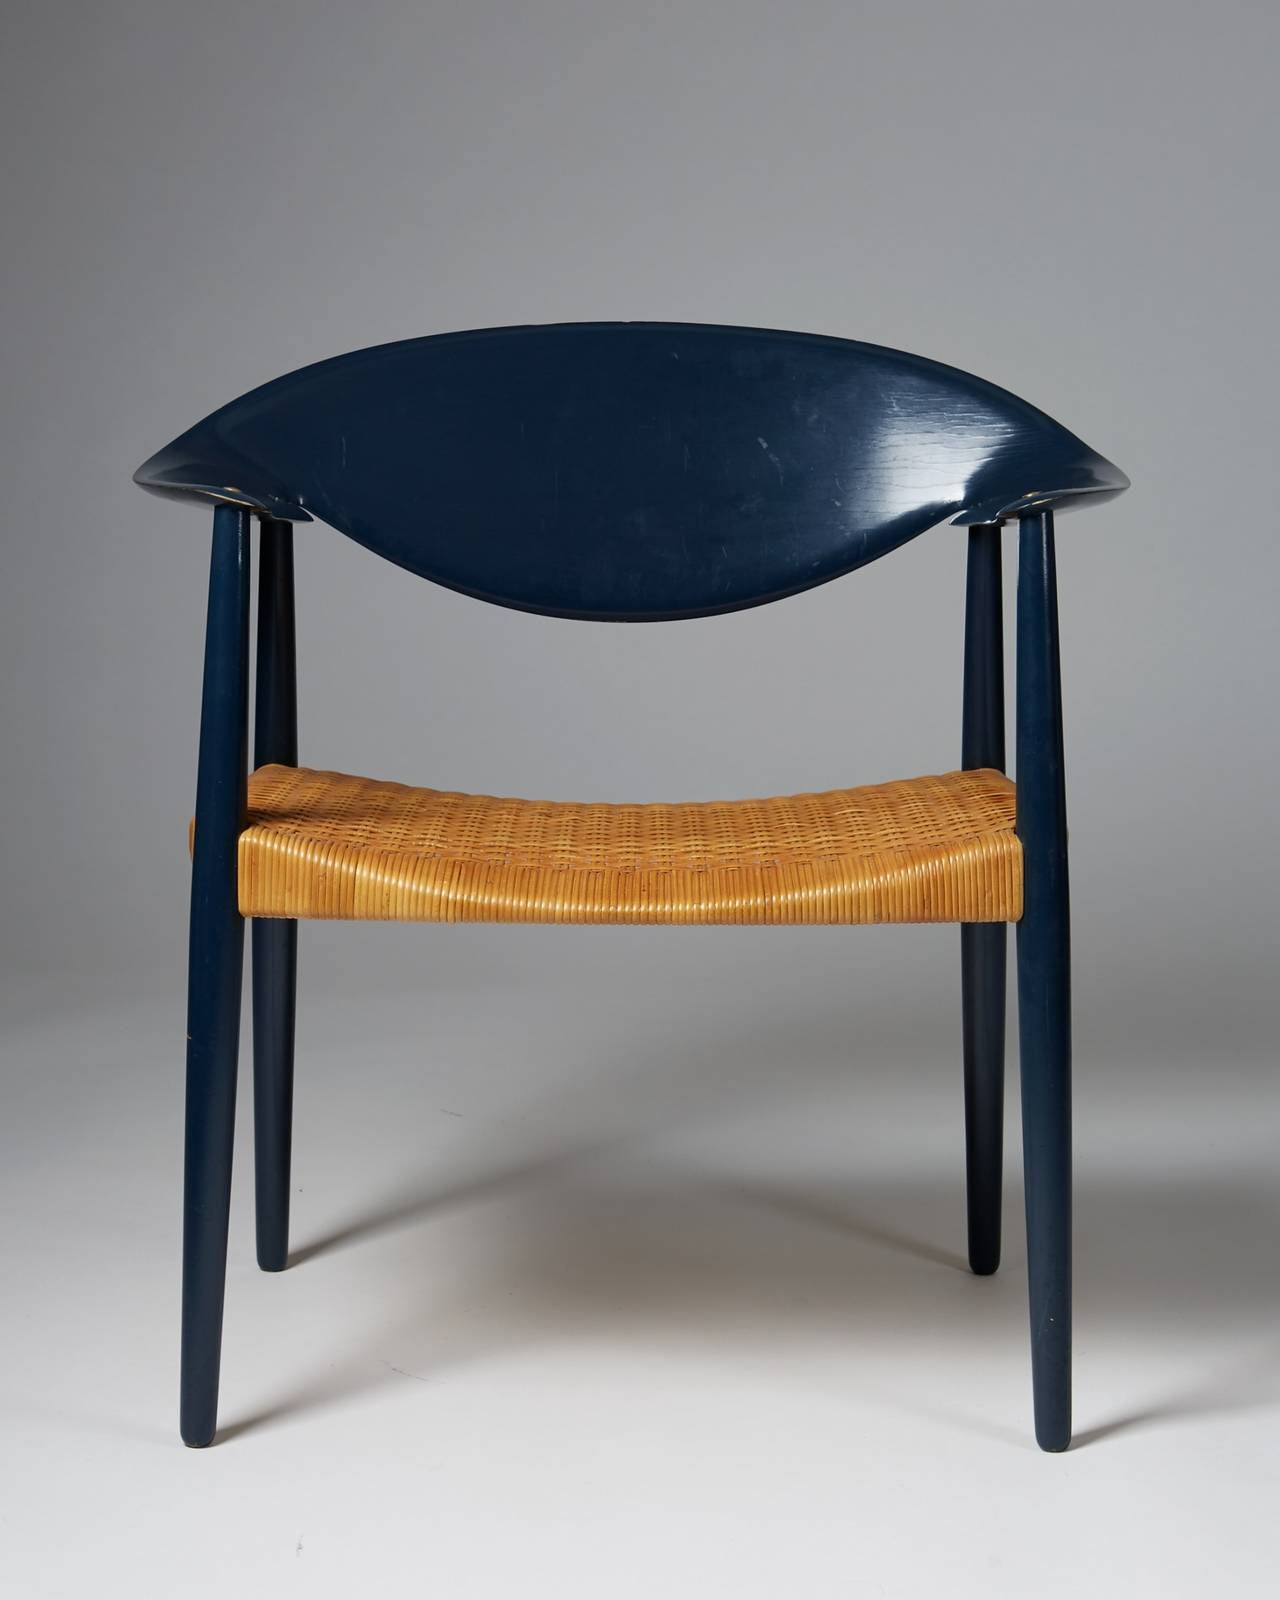 Armchair Metropolitan designed by Aksel Bender Madsen and Ejner Larsen for Willy Beck,
Denmark. 1950s.

Lacquered wood and original cane.

Dimensions:
H: 78 cm/ 2' 7''
D: 50 cm/ 1' 8''
W: 76 cm/ 2' 6 1/4''
SH: 40 cm/ 1' 4''
Arm rest: 6.5 cm/ 2' 3''
 